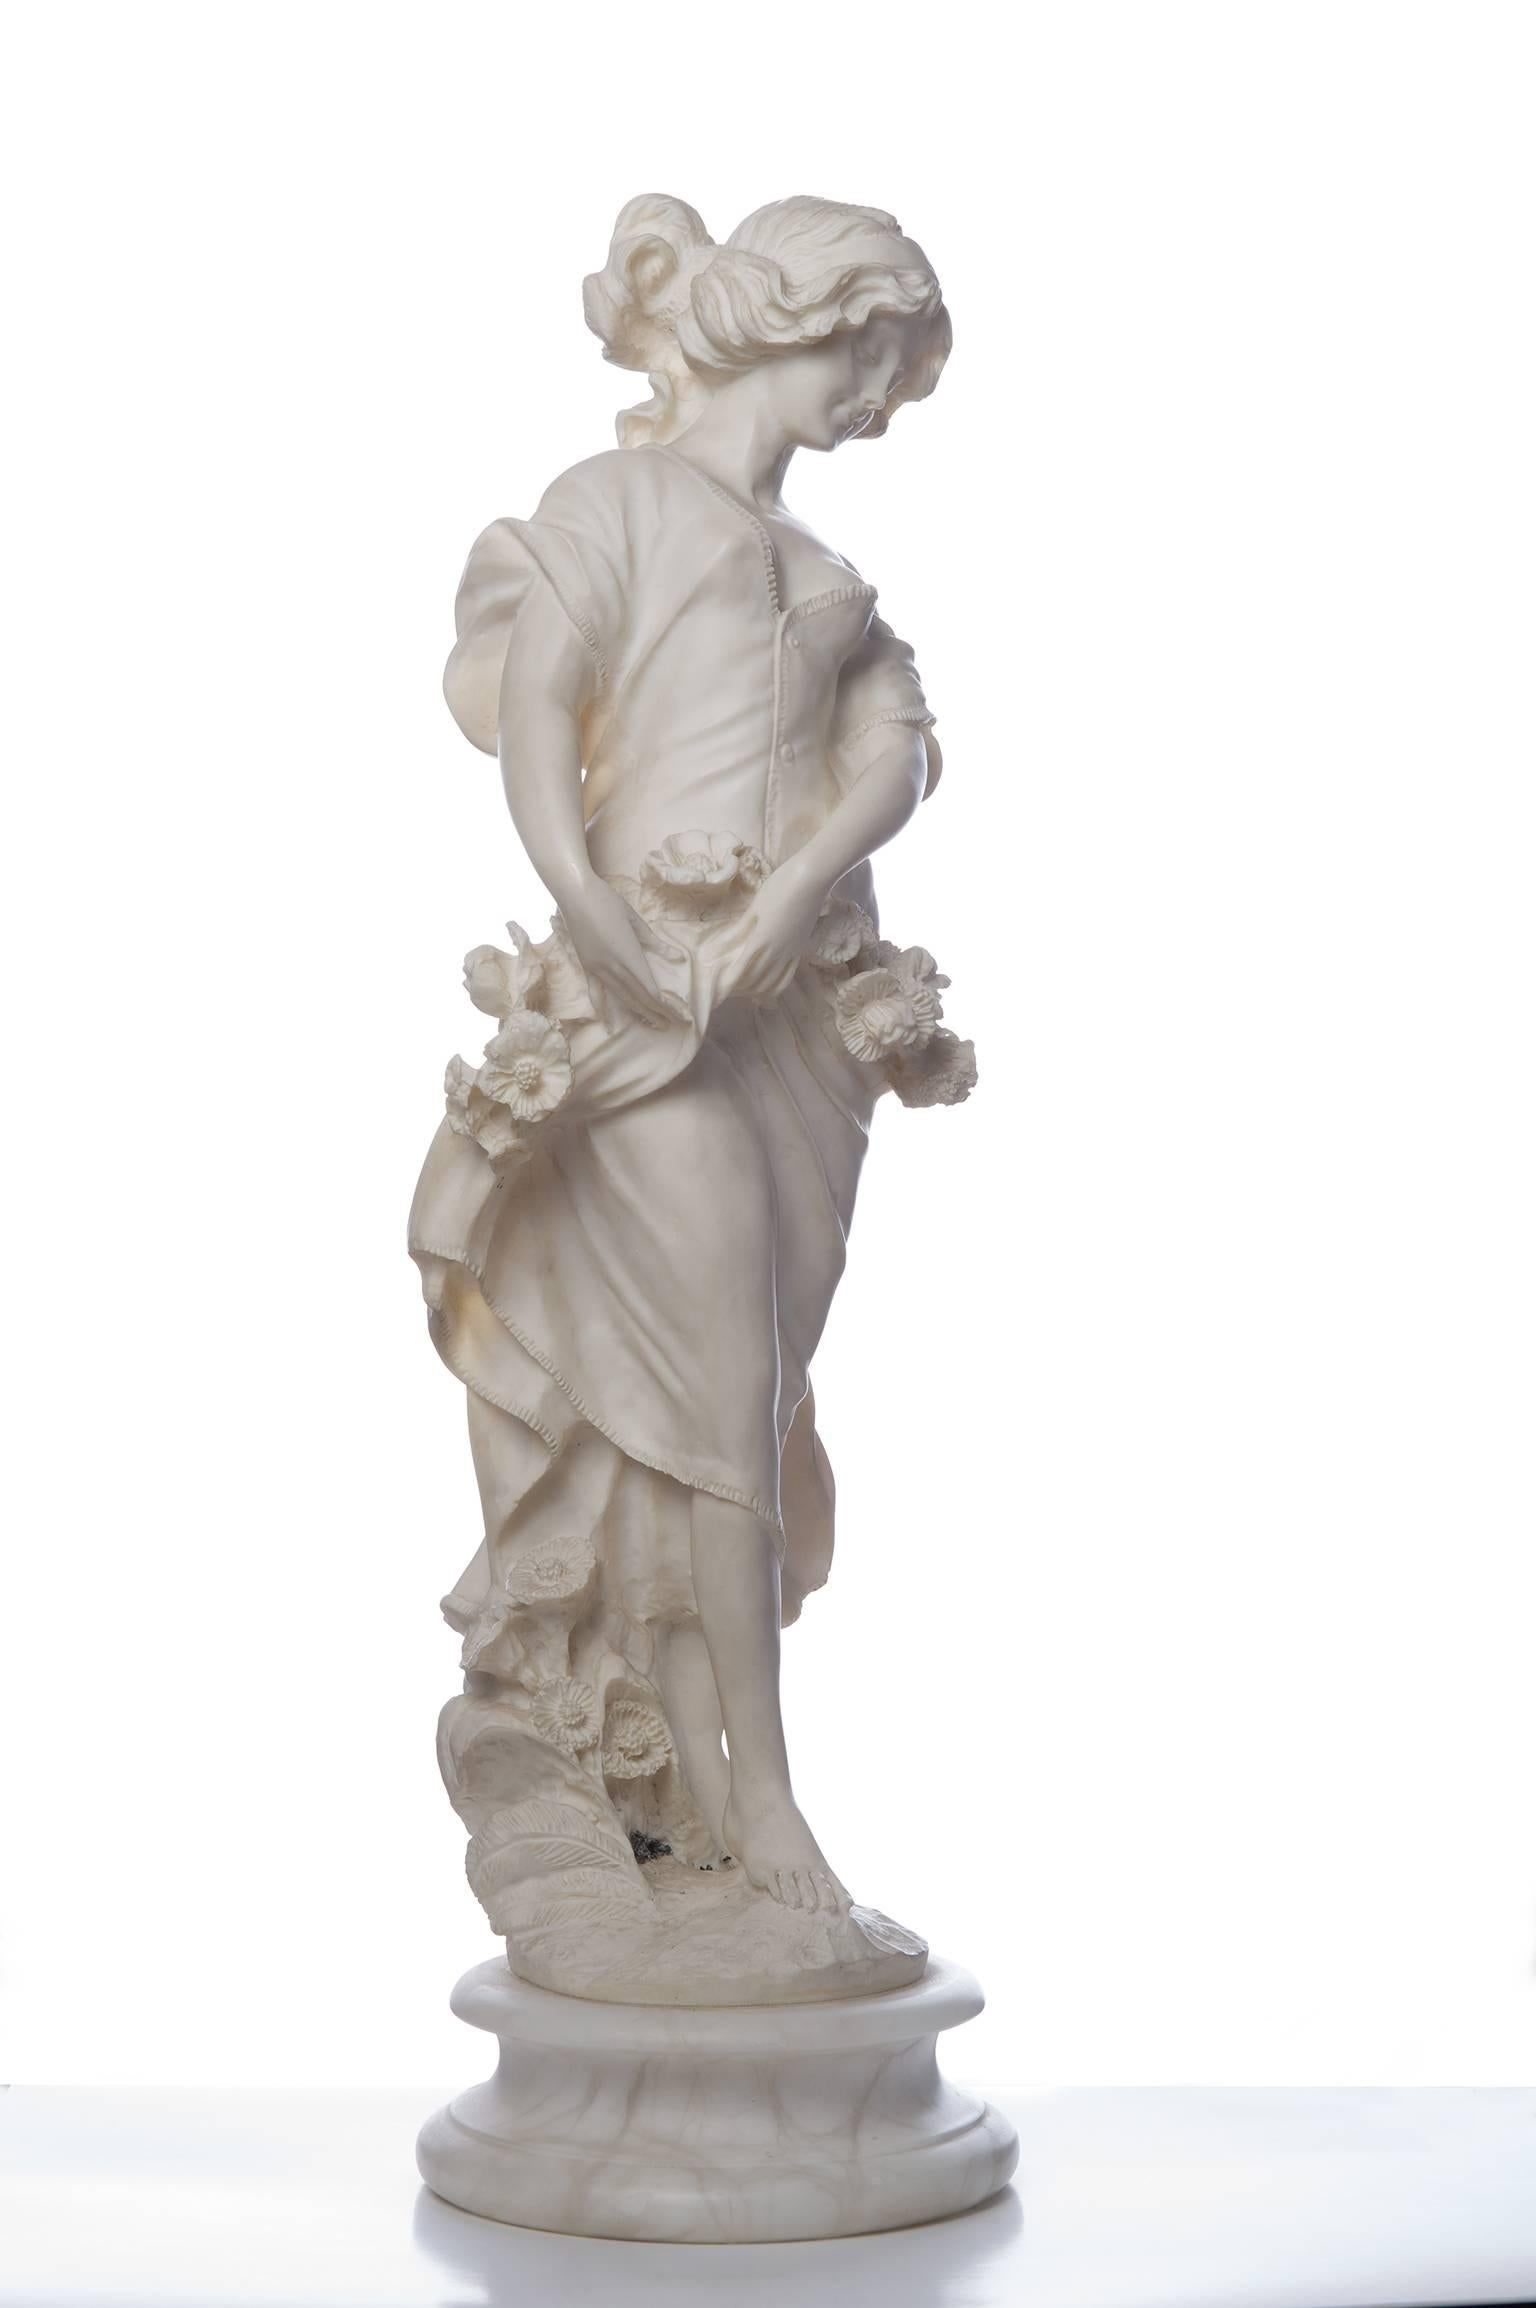 Enchanting female figure with flowers that represents Spring, like the famous statue on the Italian promenade in San Remo.  It's rare!
Already approved by Italian Superintendence  for export - 

O/6803.
